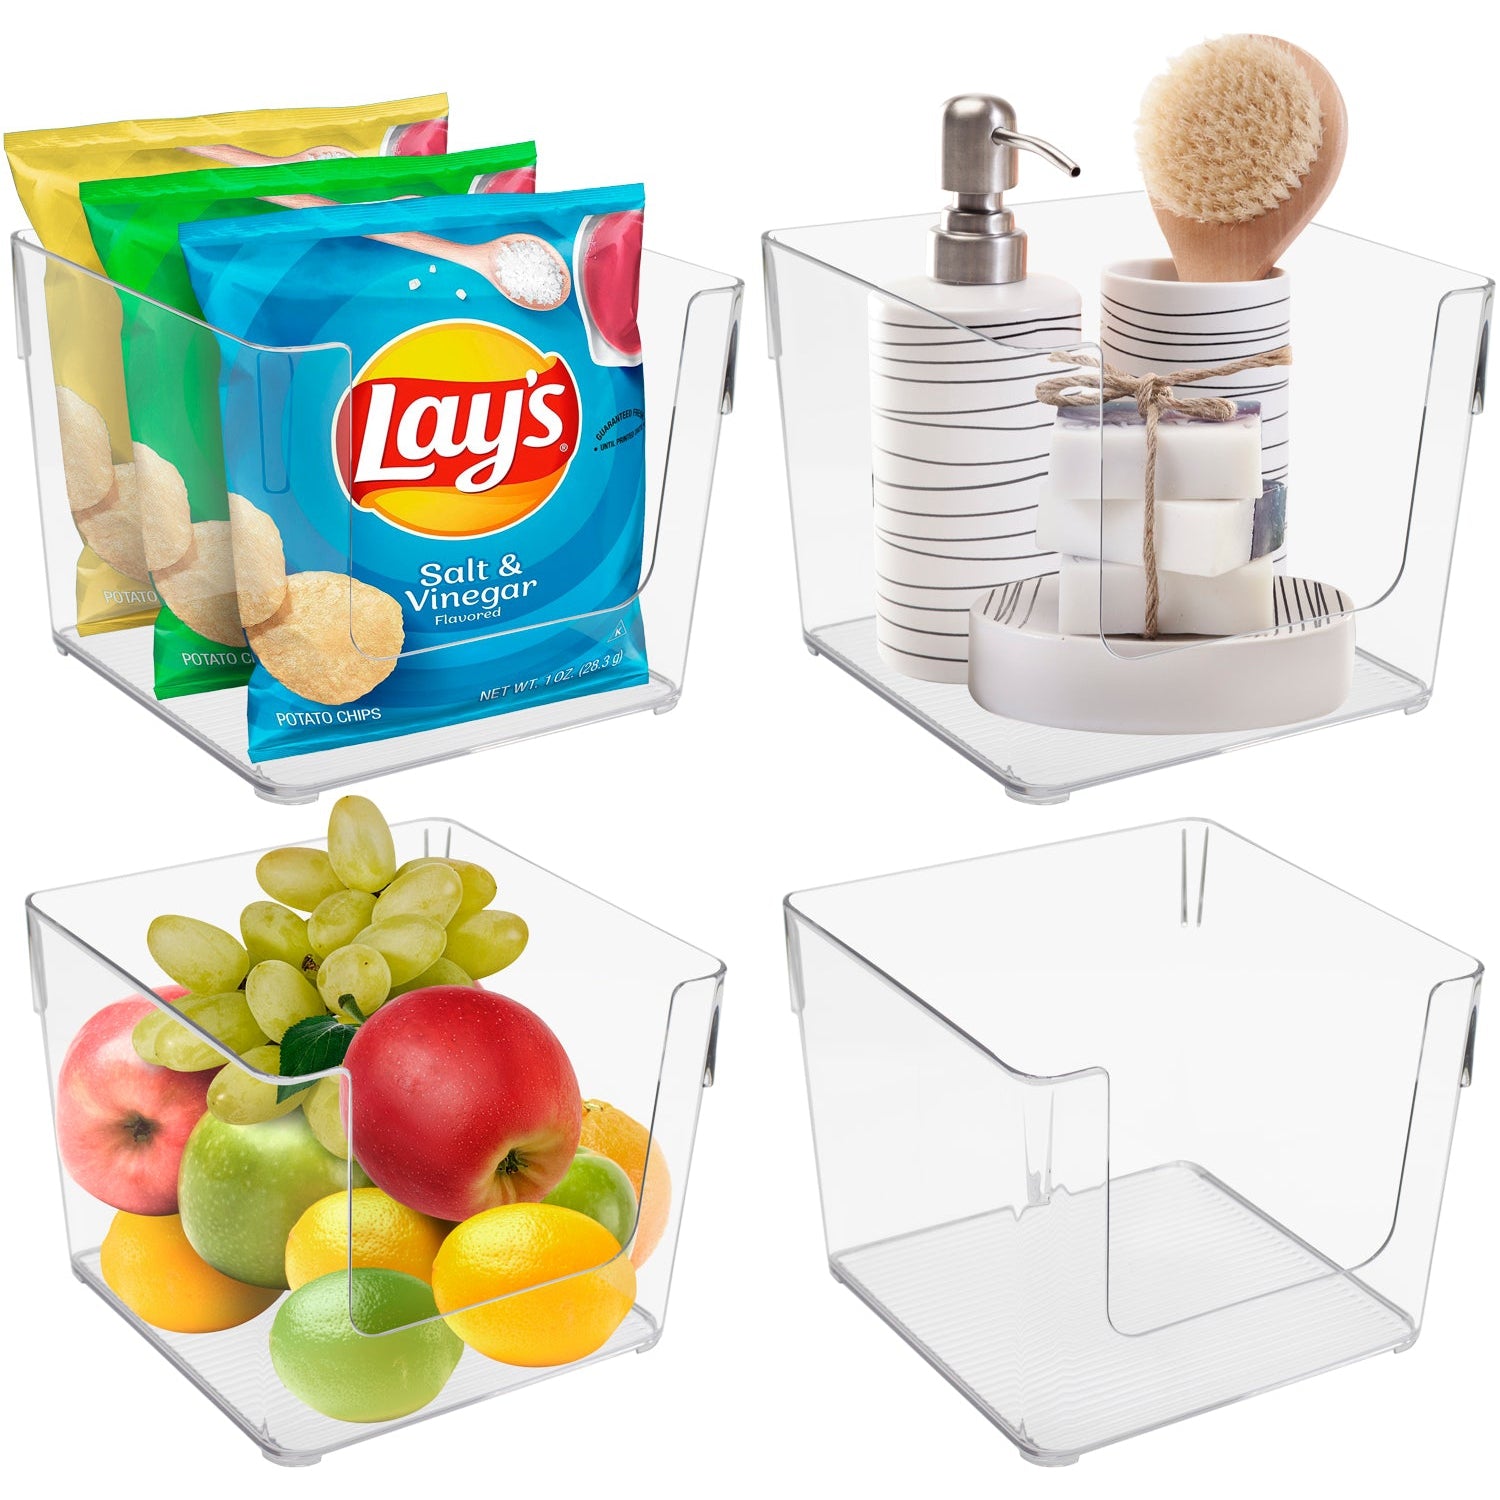 Clear Open Front Container Bin Set (Small Square)